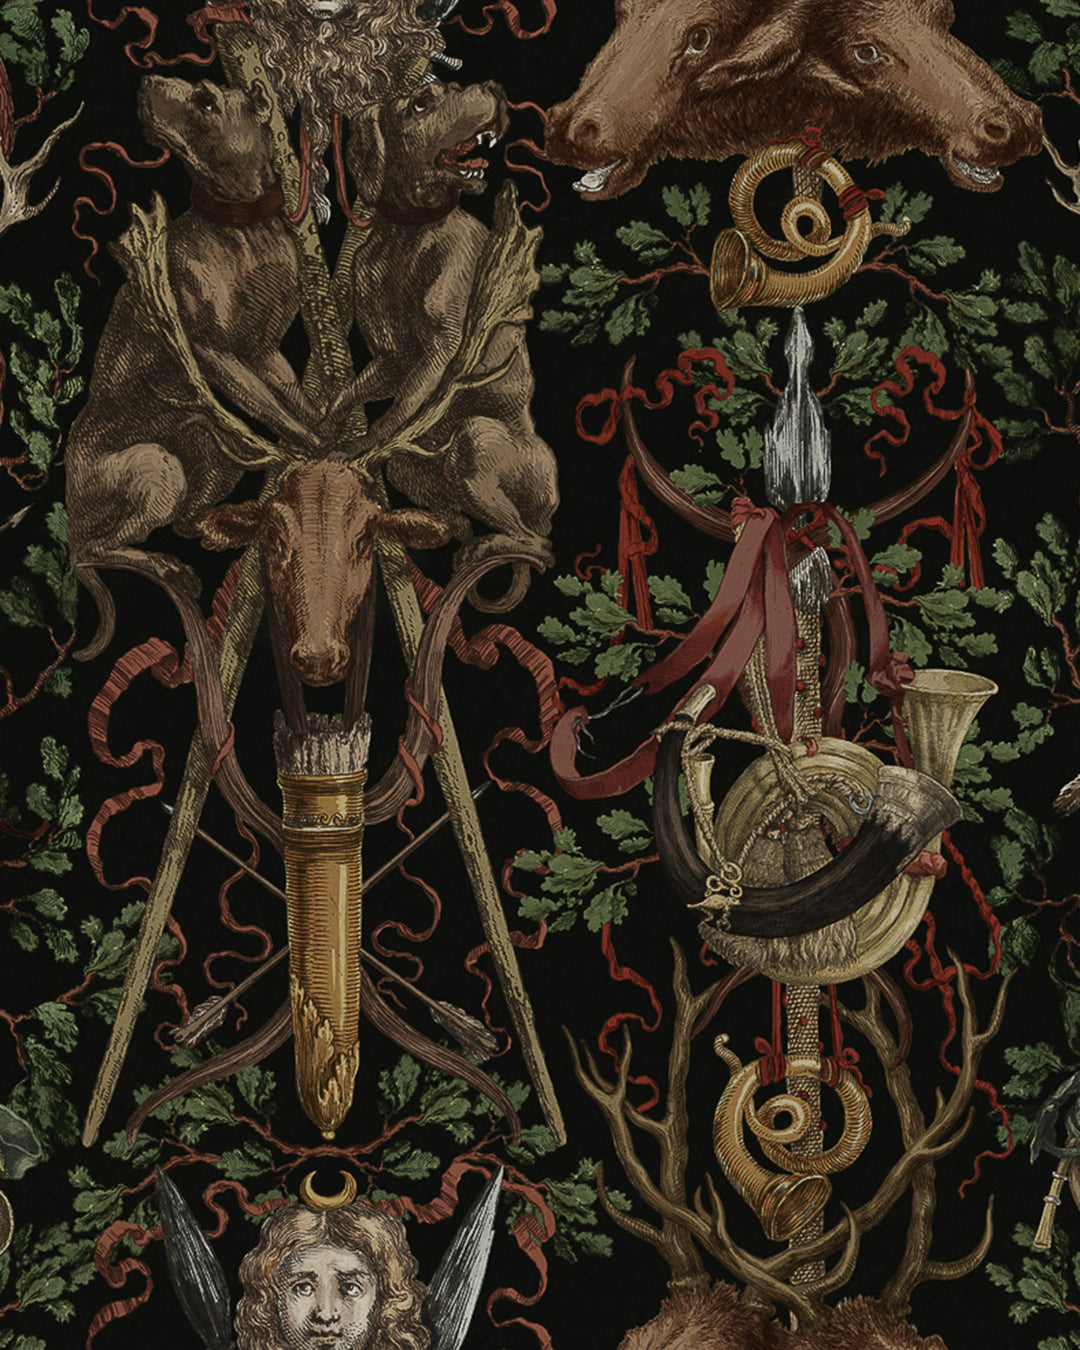 mind-the-gap-wallpaper-the-Ganghofer-hunt-lodge-style-pattern-boars-dogs-traditional-tapestry-print-vines-WP20691